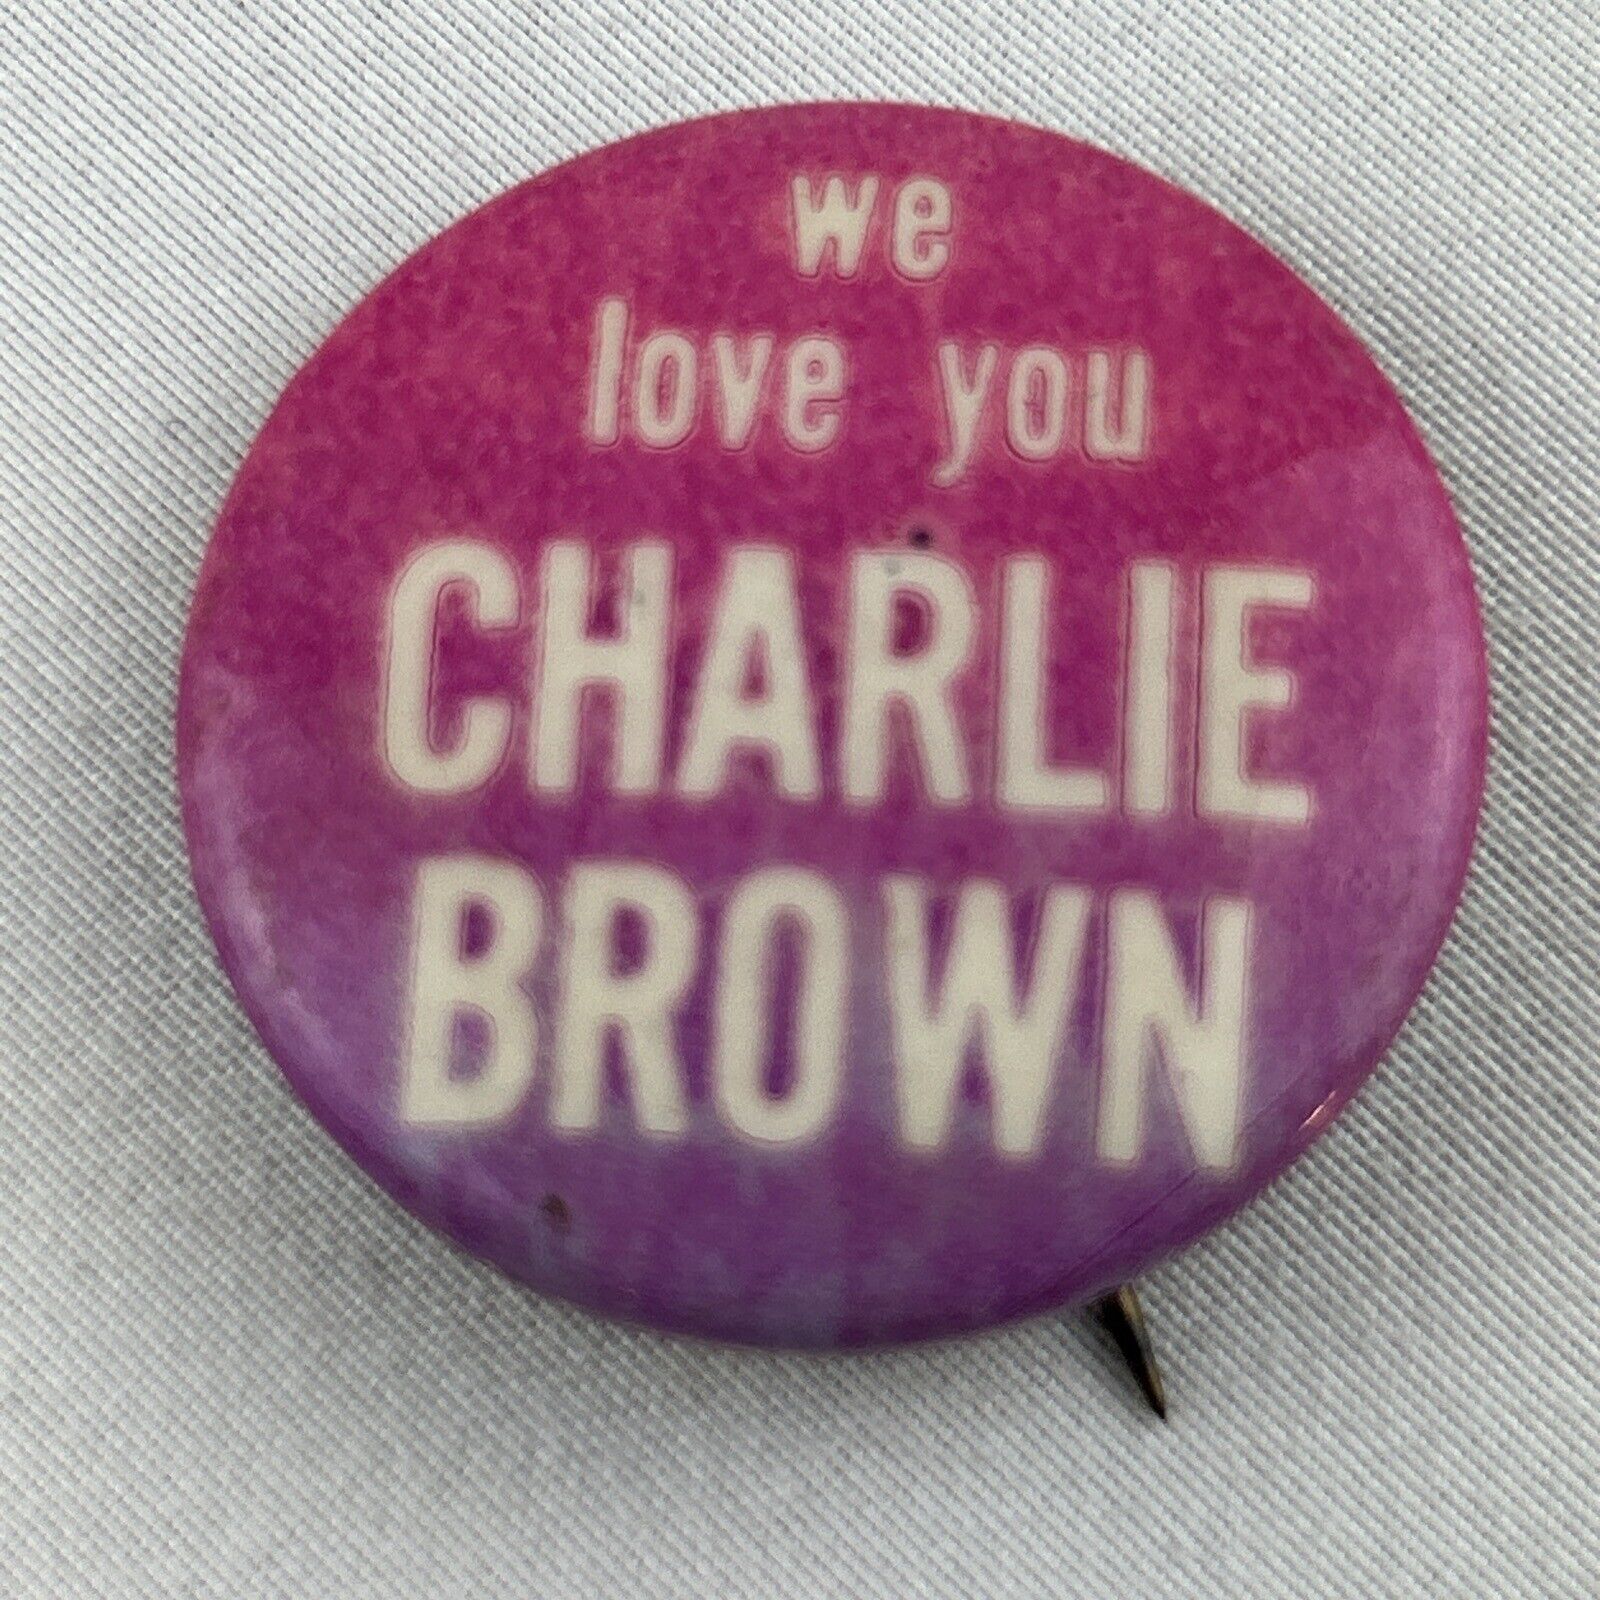 Vintage Charlie Brown Hippie Counter Culture Pin Pinback Button We Love You